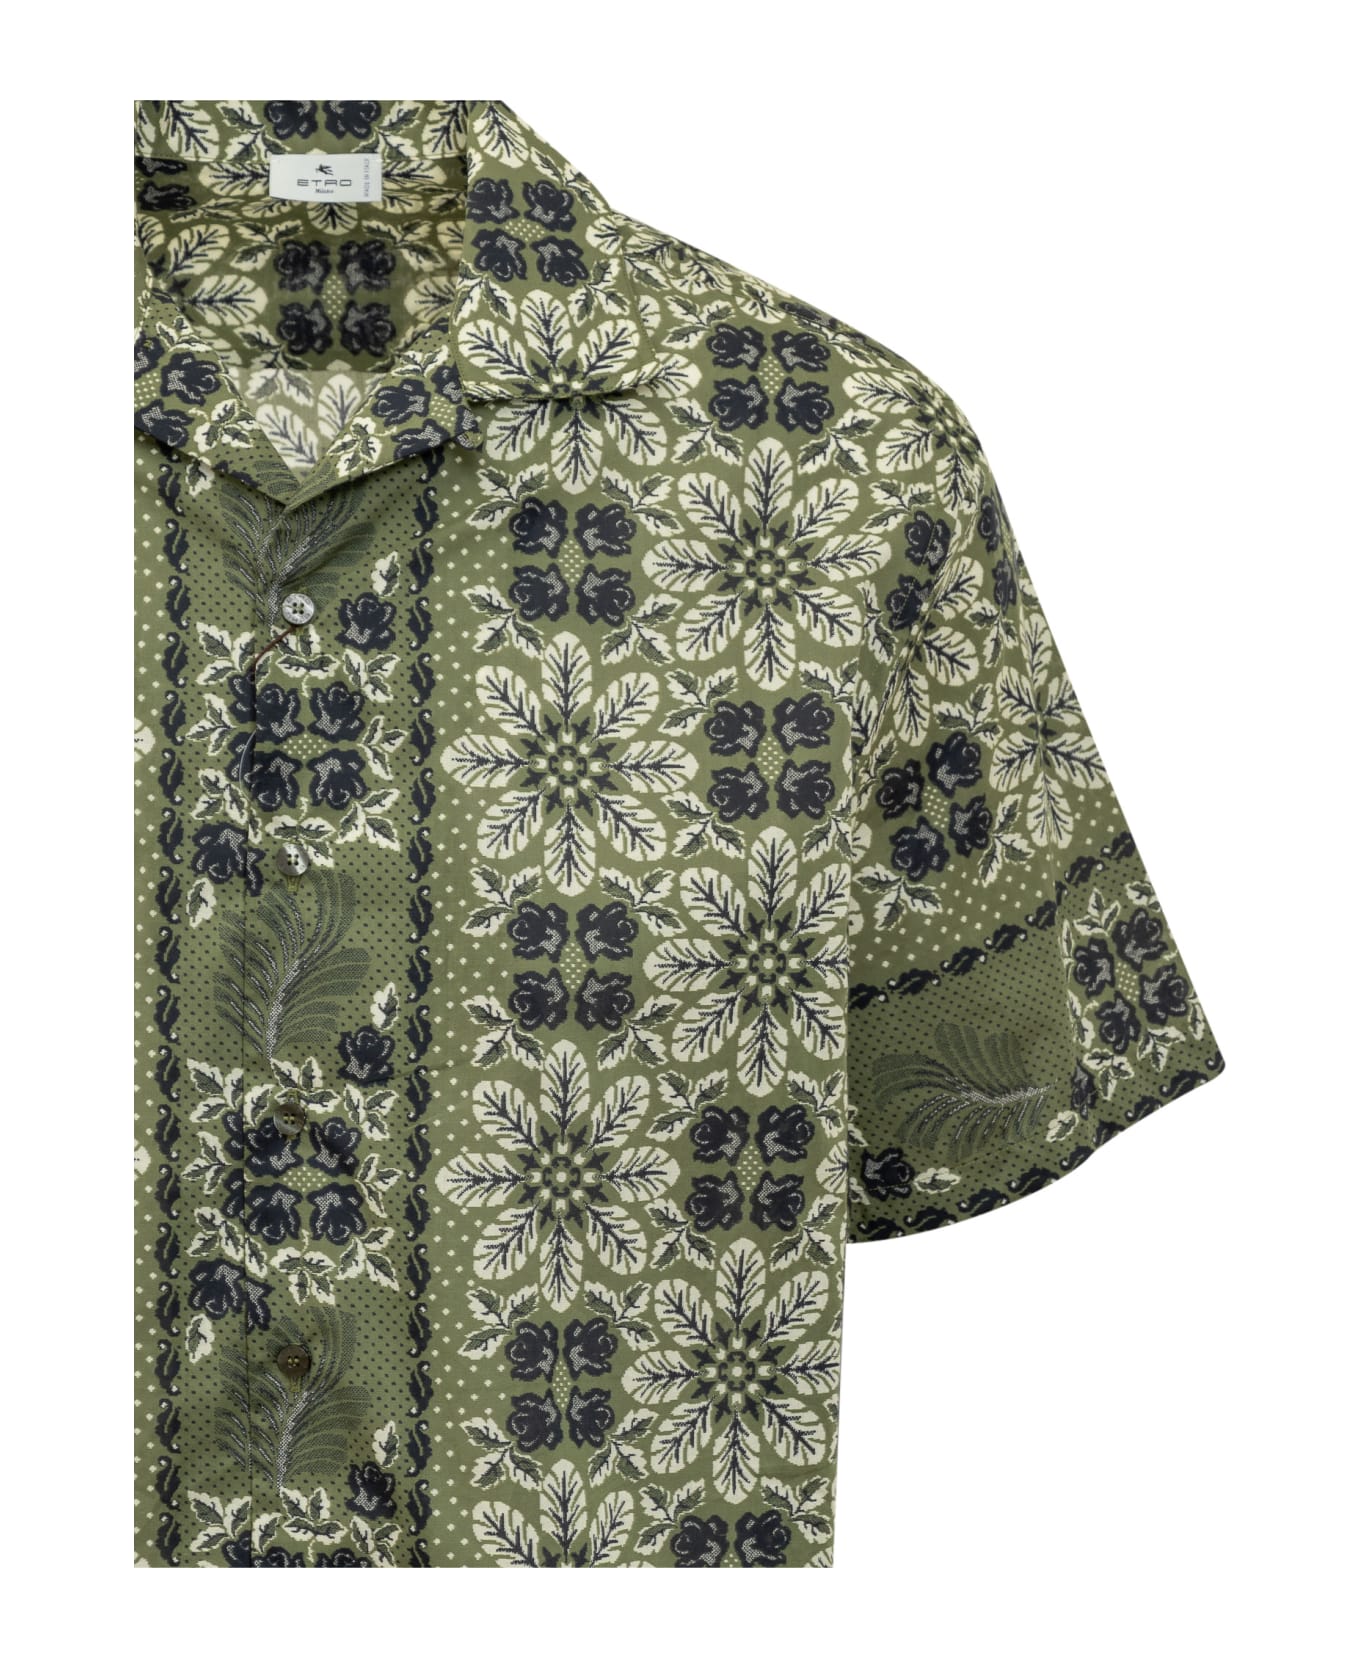 Etro Bowling Shirt With Floral Foliage Print - ST FDO VERDE